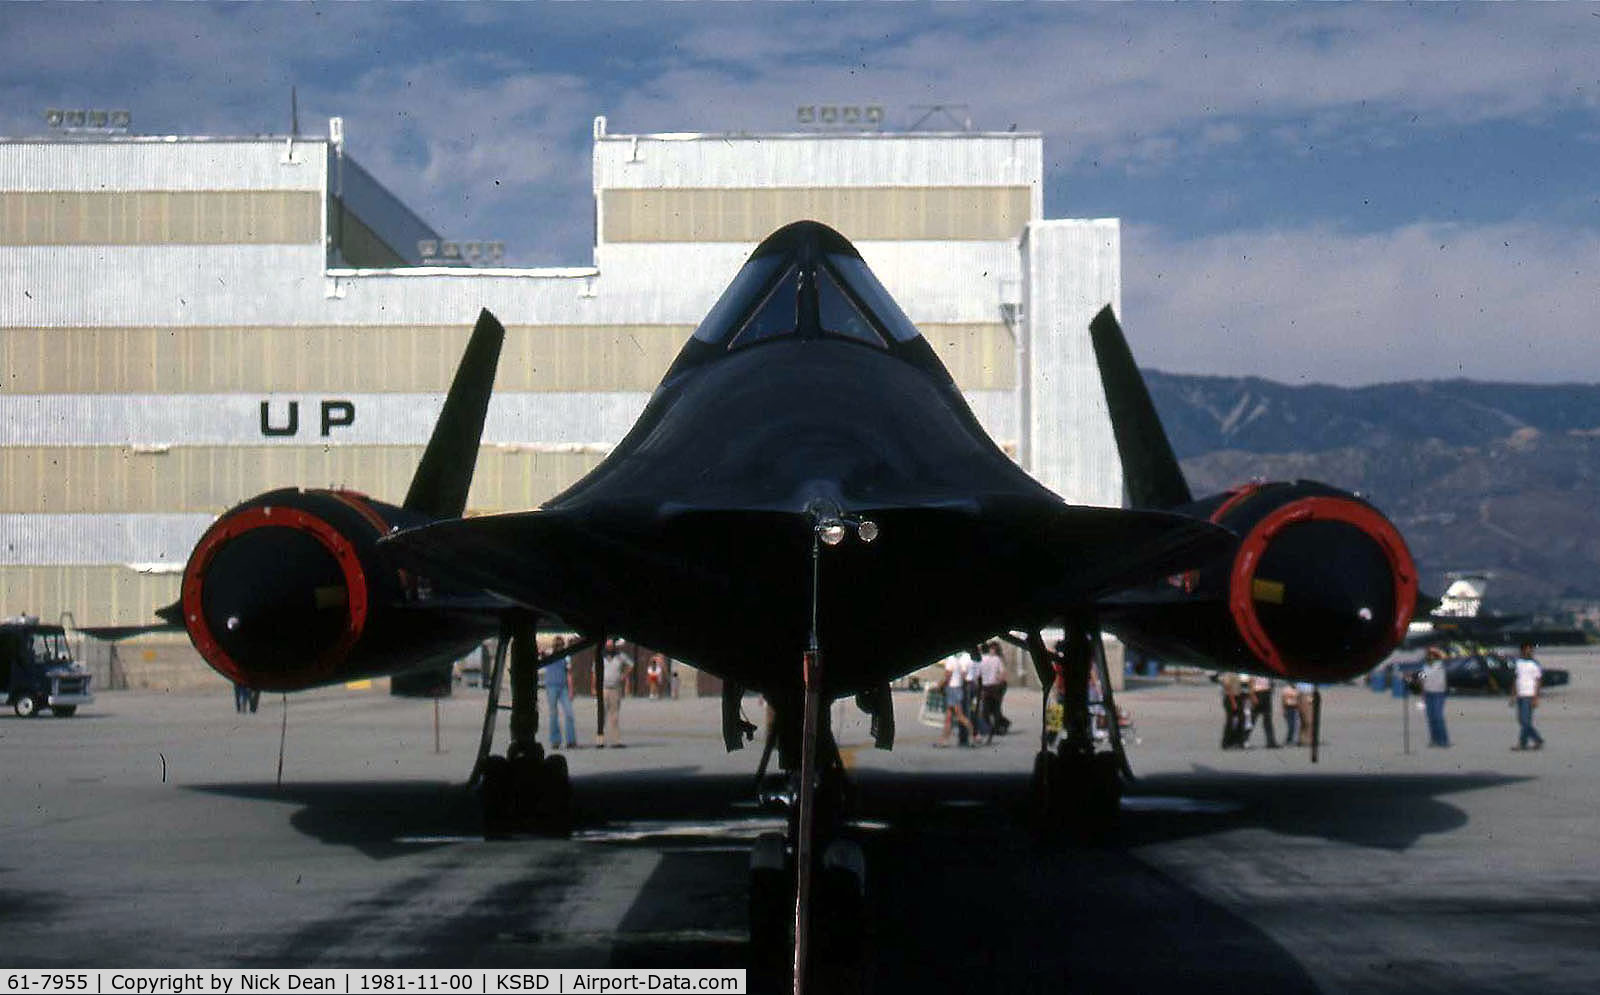 61-7955, 1961 Lockheed SR-71A Blackbird C/N 2006, KSBD sitting on the ramp in the static prior to being tugged out for the flying display